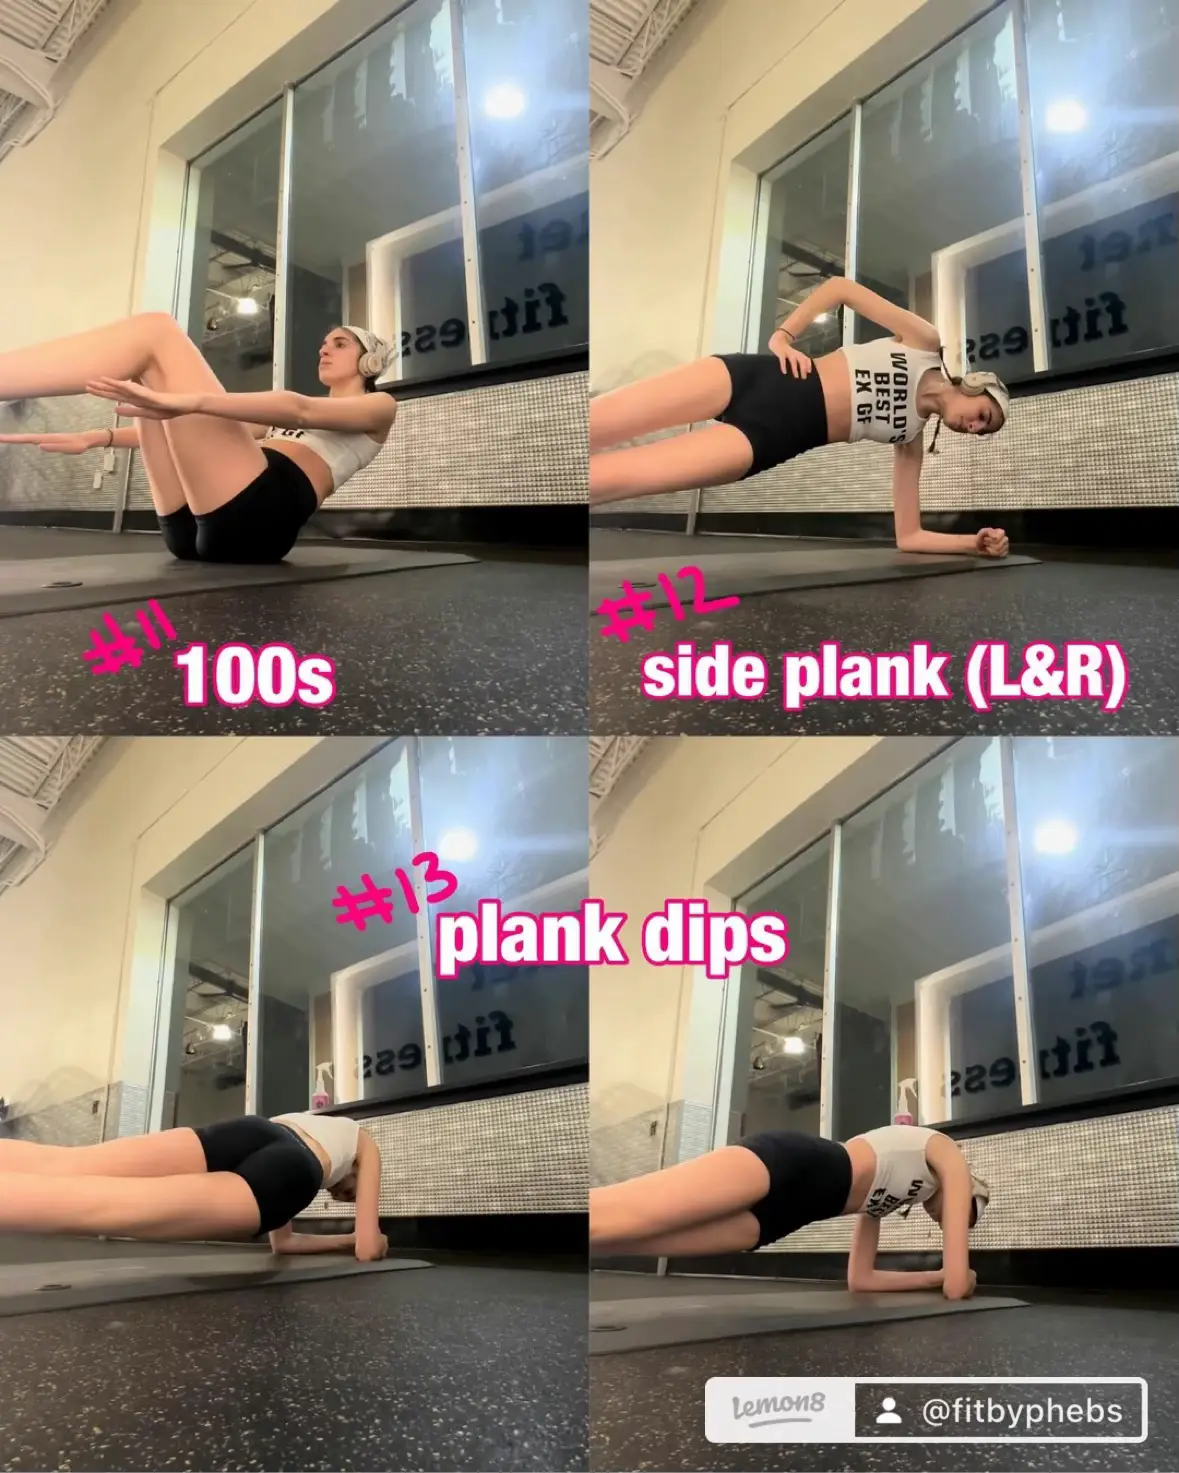 try this quickie pilates abs series to fire up your core! 🥵🔥 8 reps , pilates